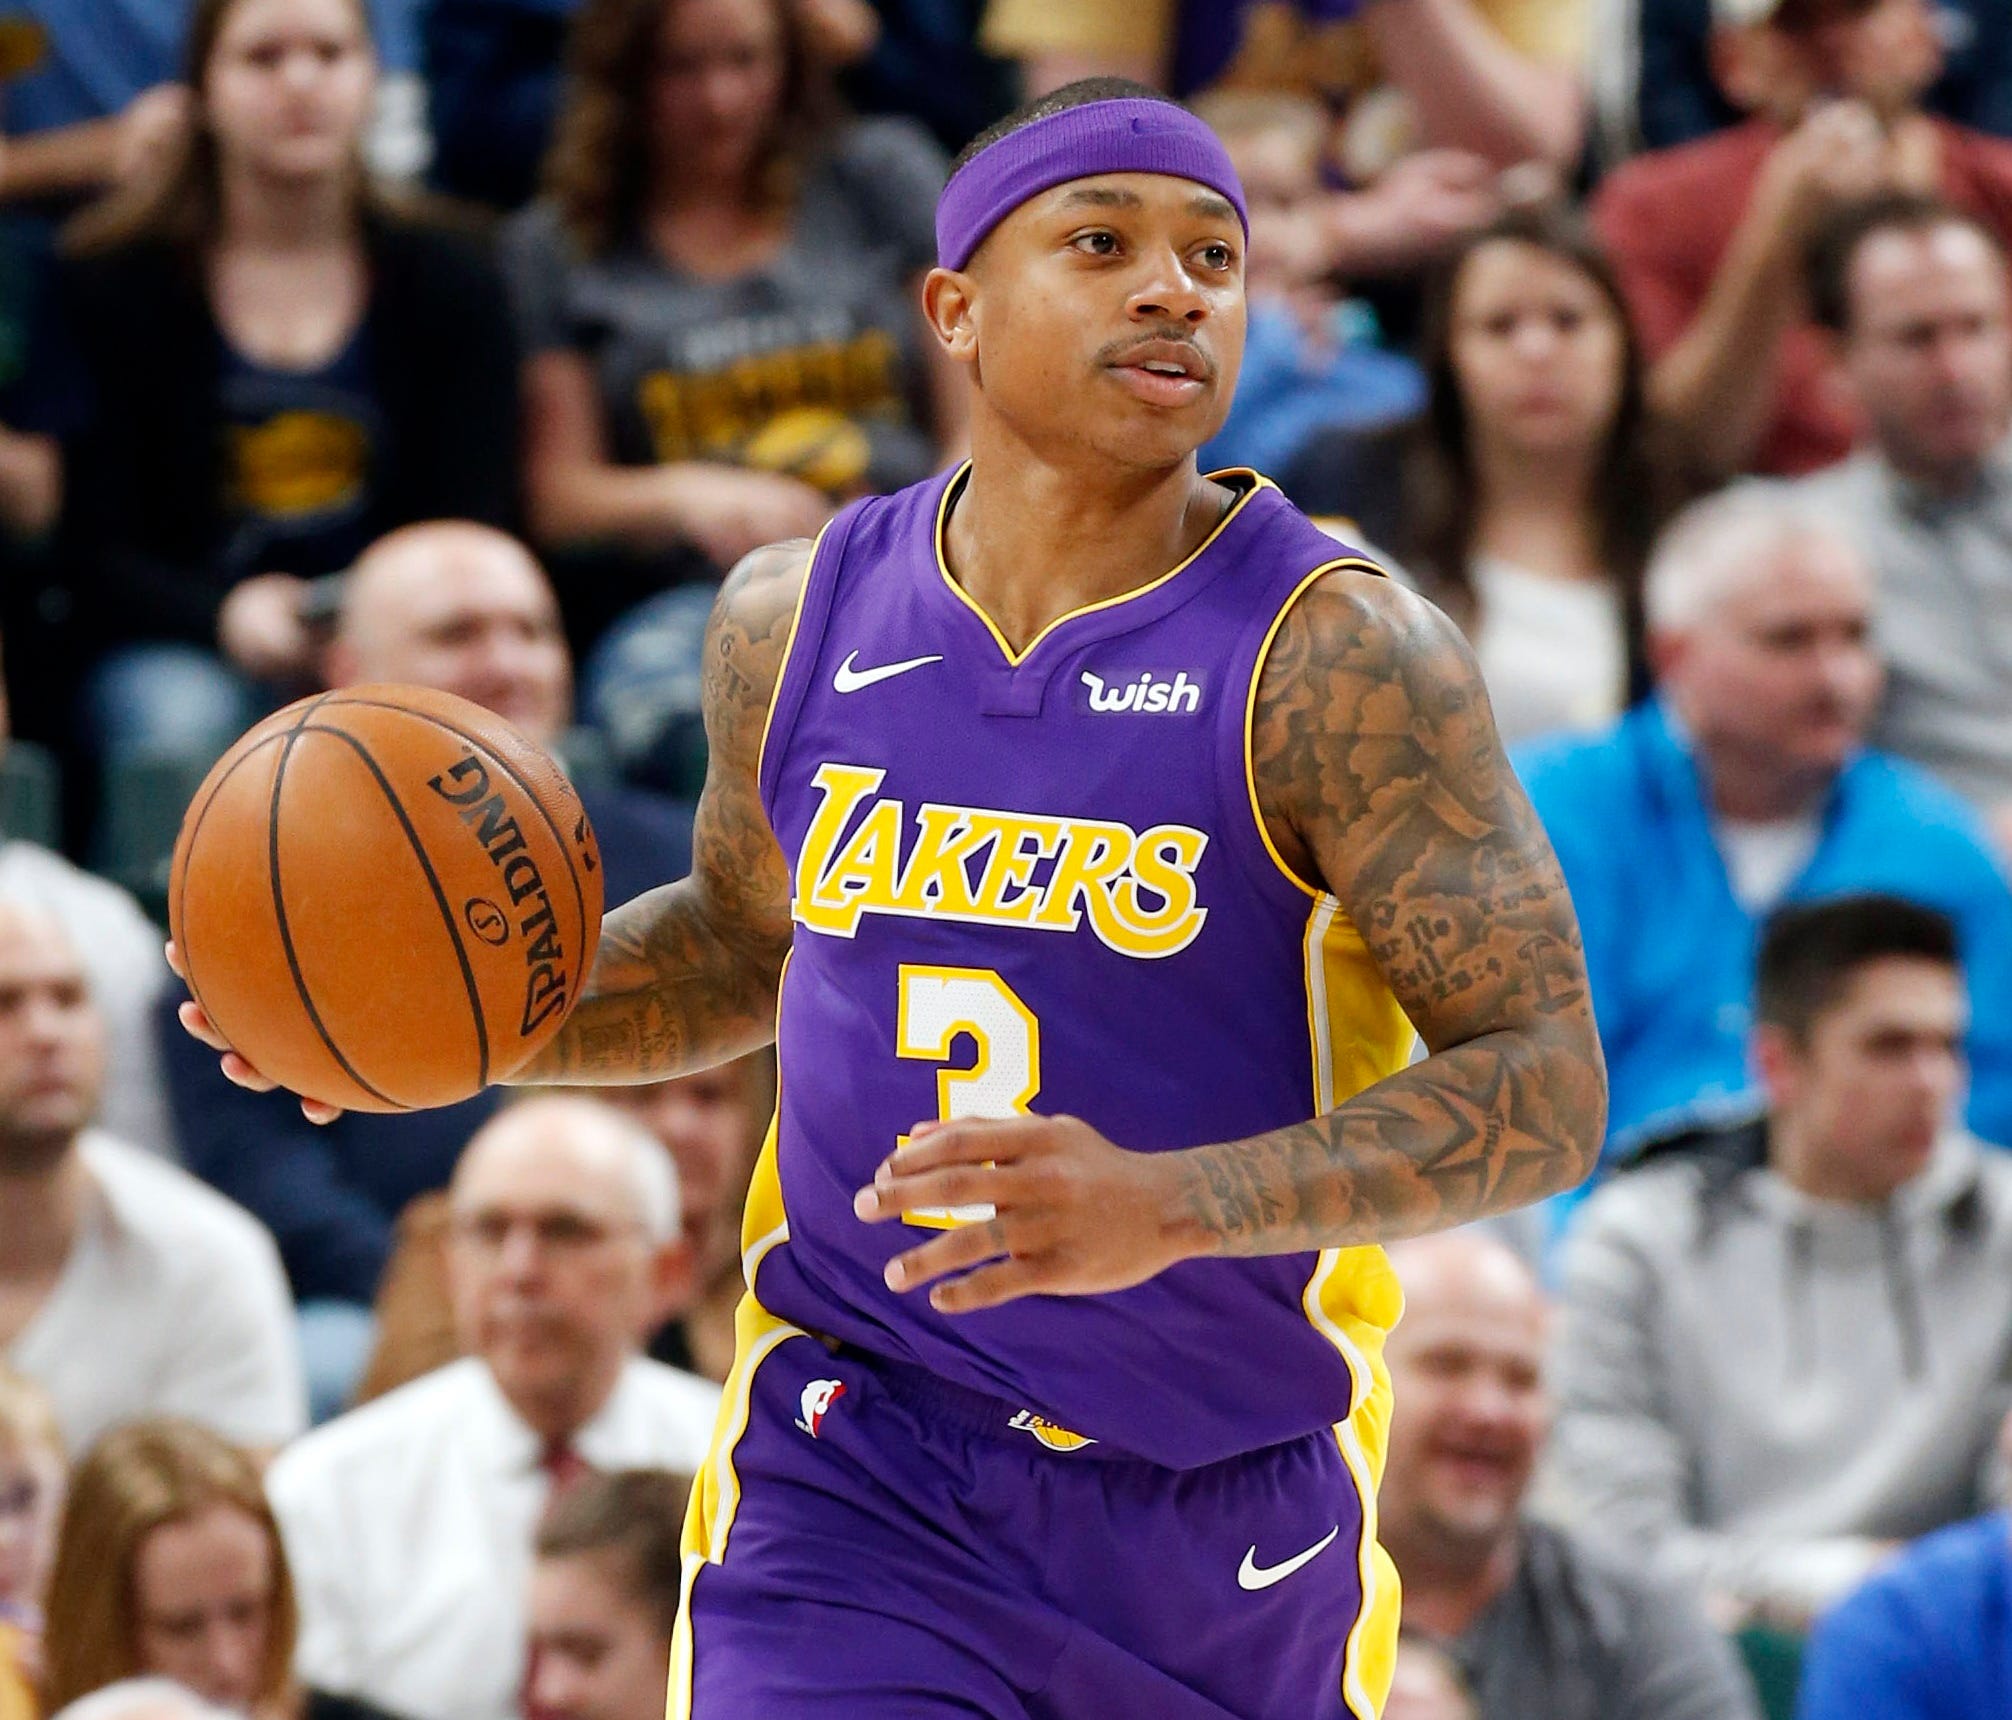 Isaiah Thomas played 32 combined games for the Cavaliers and Lakers this past season.